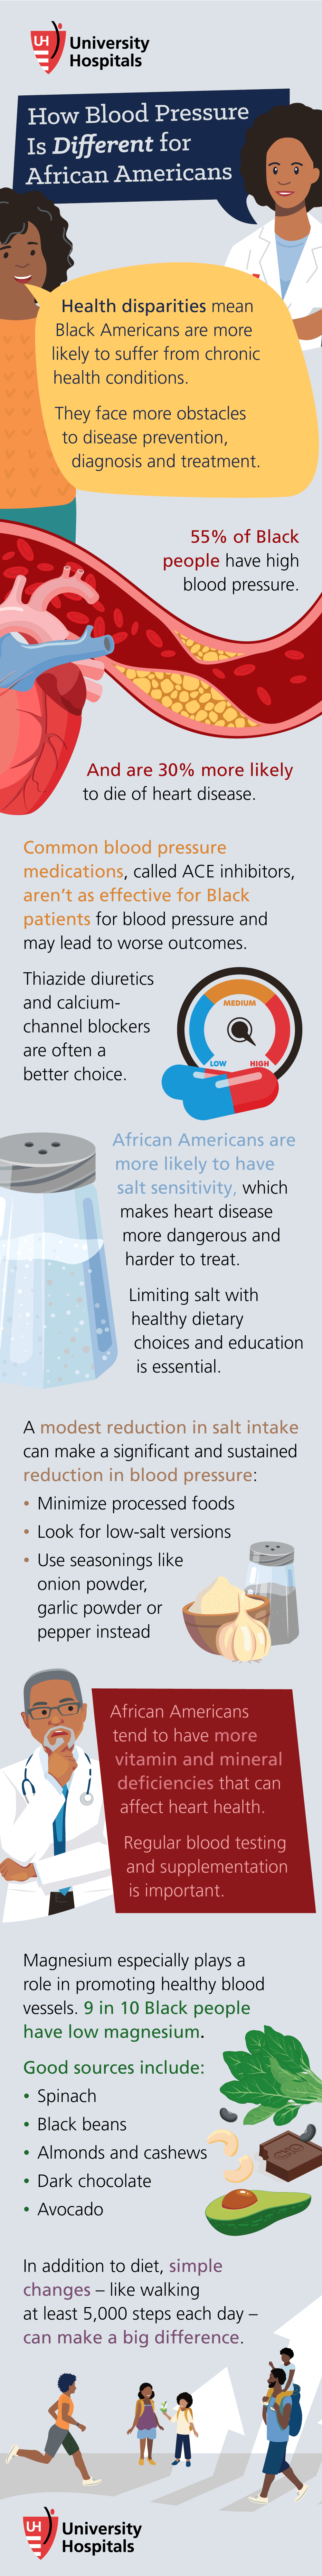 Infographic: How Blood Pressure Is Different for African Americans